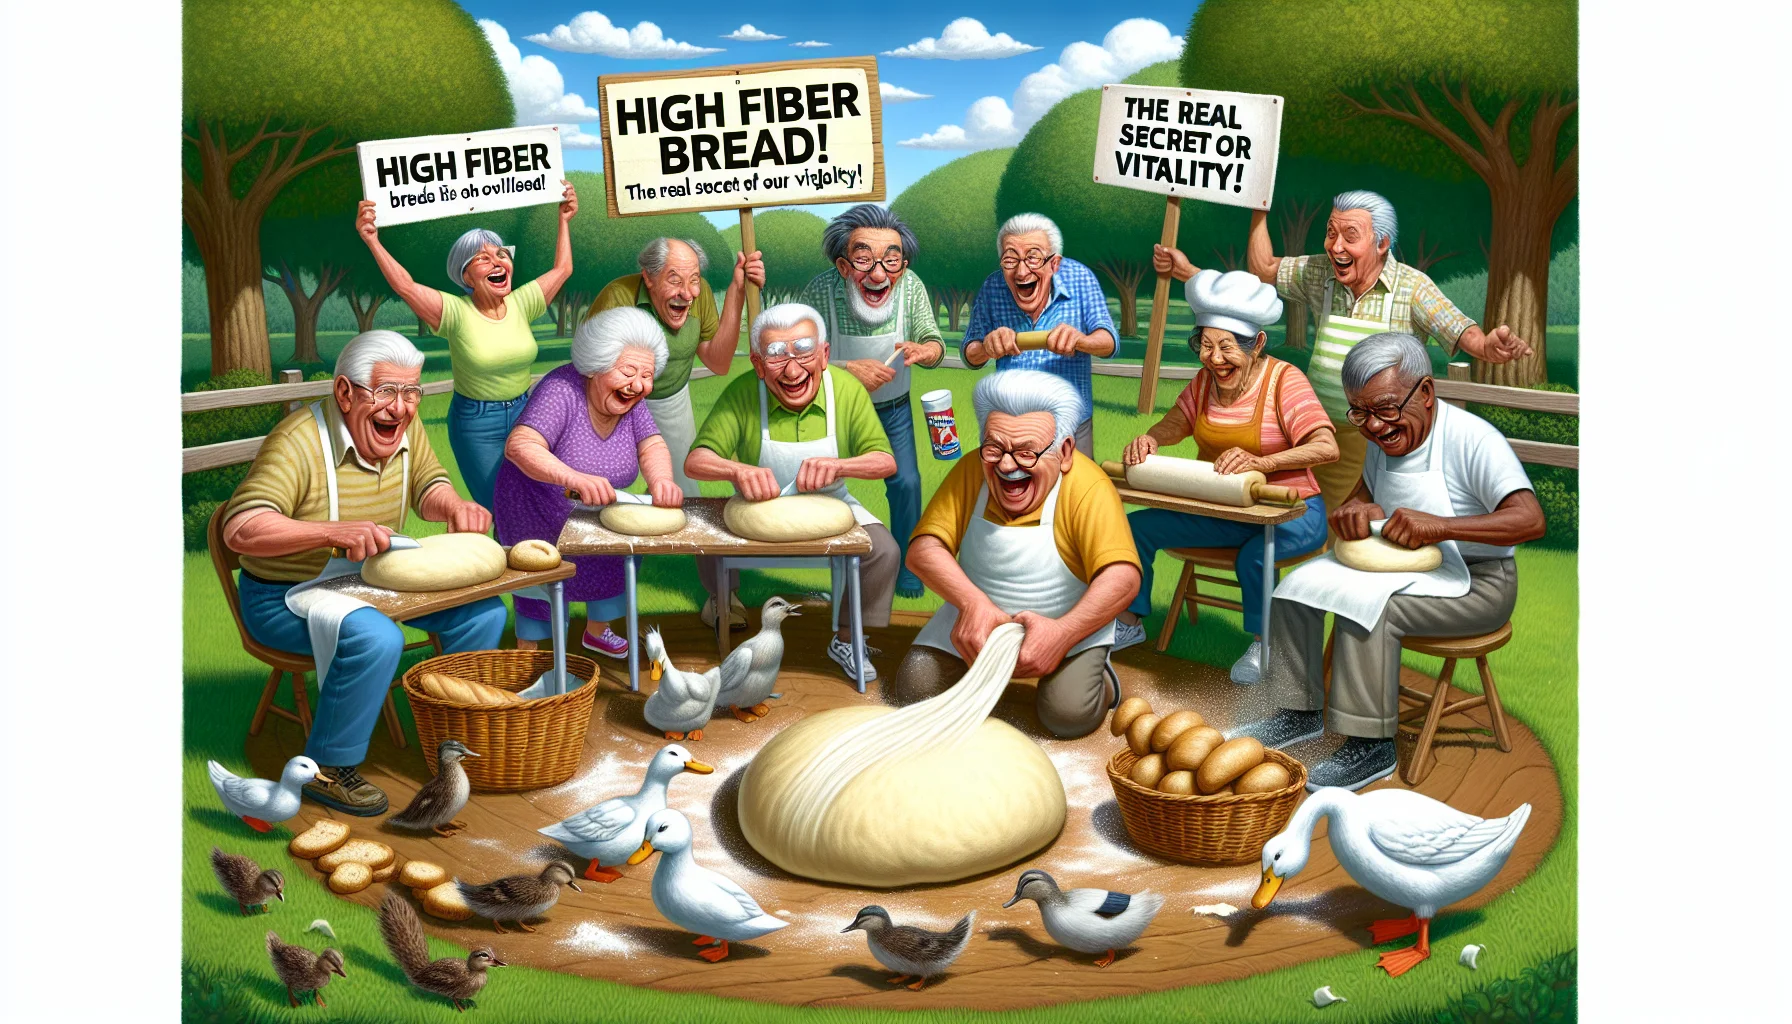 Create a humorous, realistic picture that underlines the concept of high fiber in bread. Picture a lively scene in a community park, where a group of elderly people, including Caucasian, African, Hispanic, and Asian men and women are engaged in a bread-making competition. They're laughing and kneading dough with evident glee. There are huge signs around them stating 'High Fiber Bread – The Real Secret to Our Vitality!’ There are ducks around pecking at breadcrumbs, and squirrels are nibbling at crumbs too. Make sure to include a background with lush trees and a clear, sunny sky.